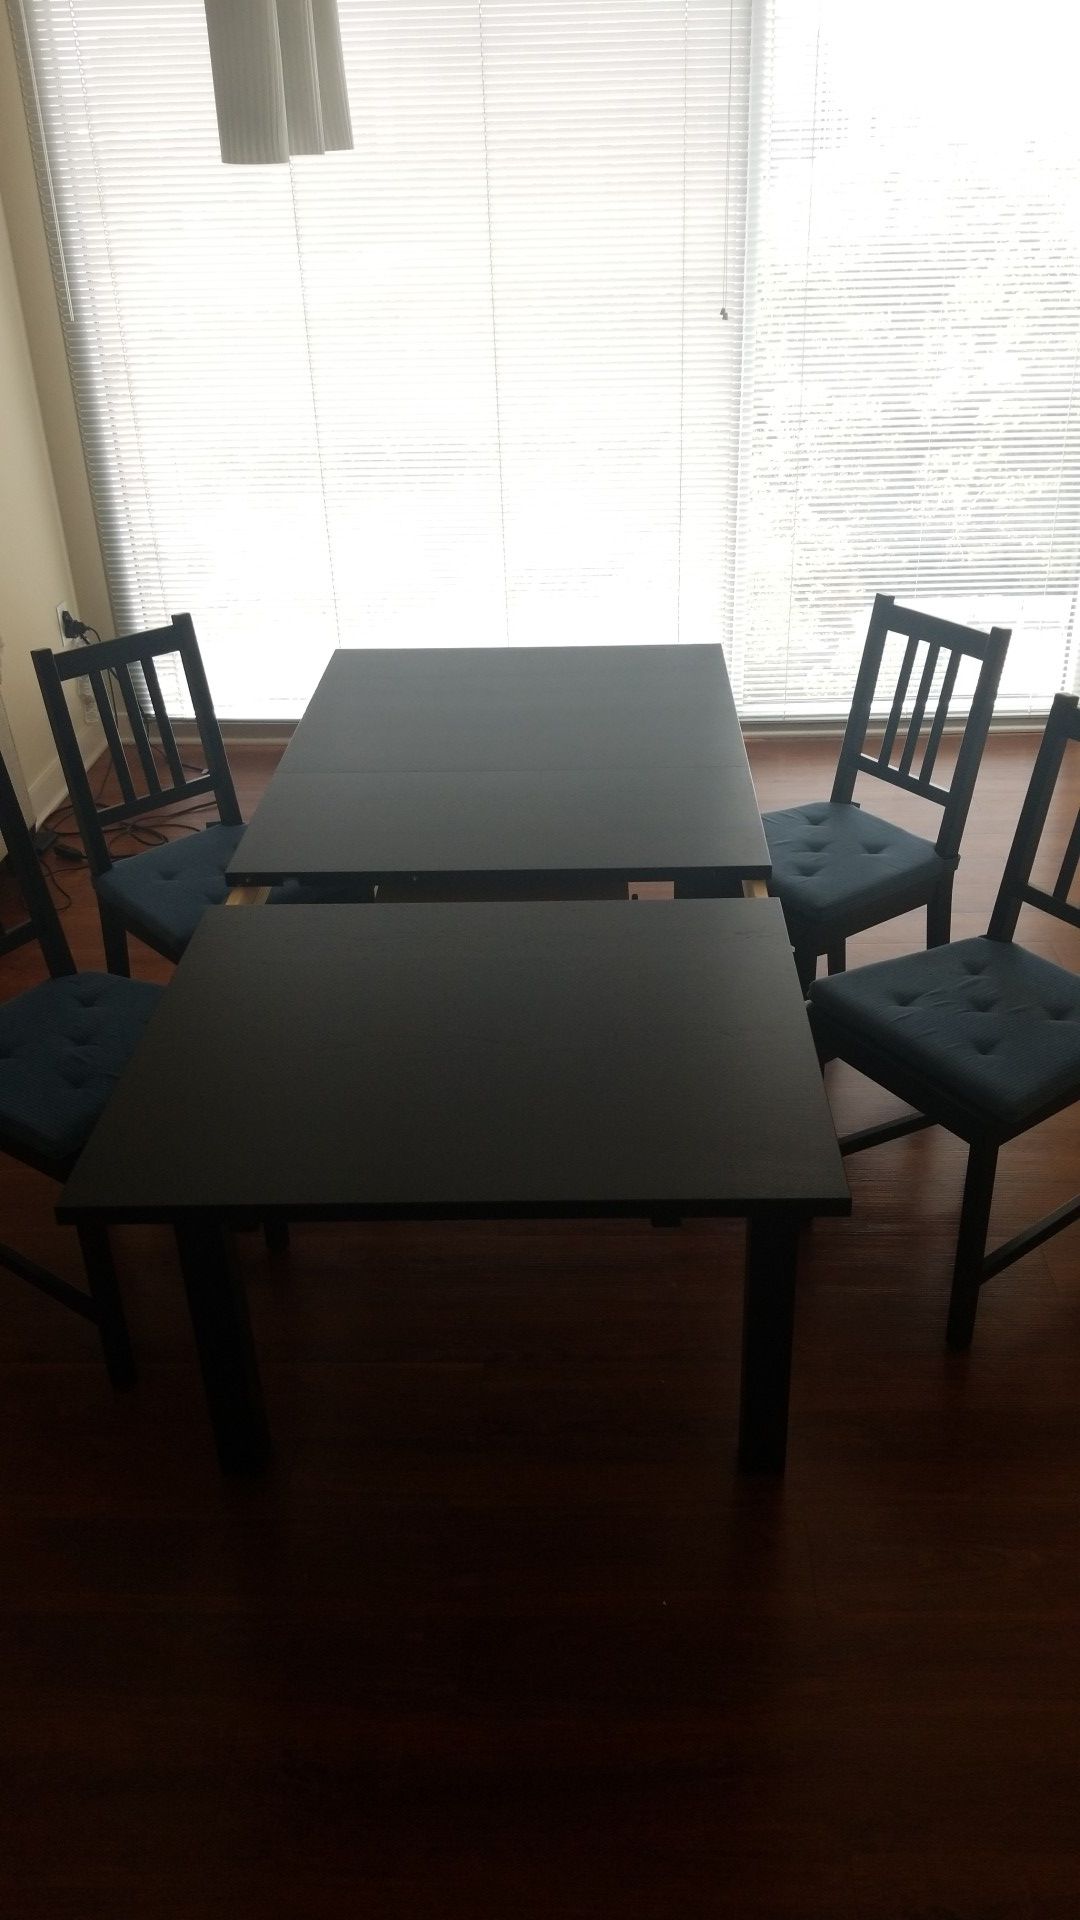 IKEA Bjursta extendable table with chairs